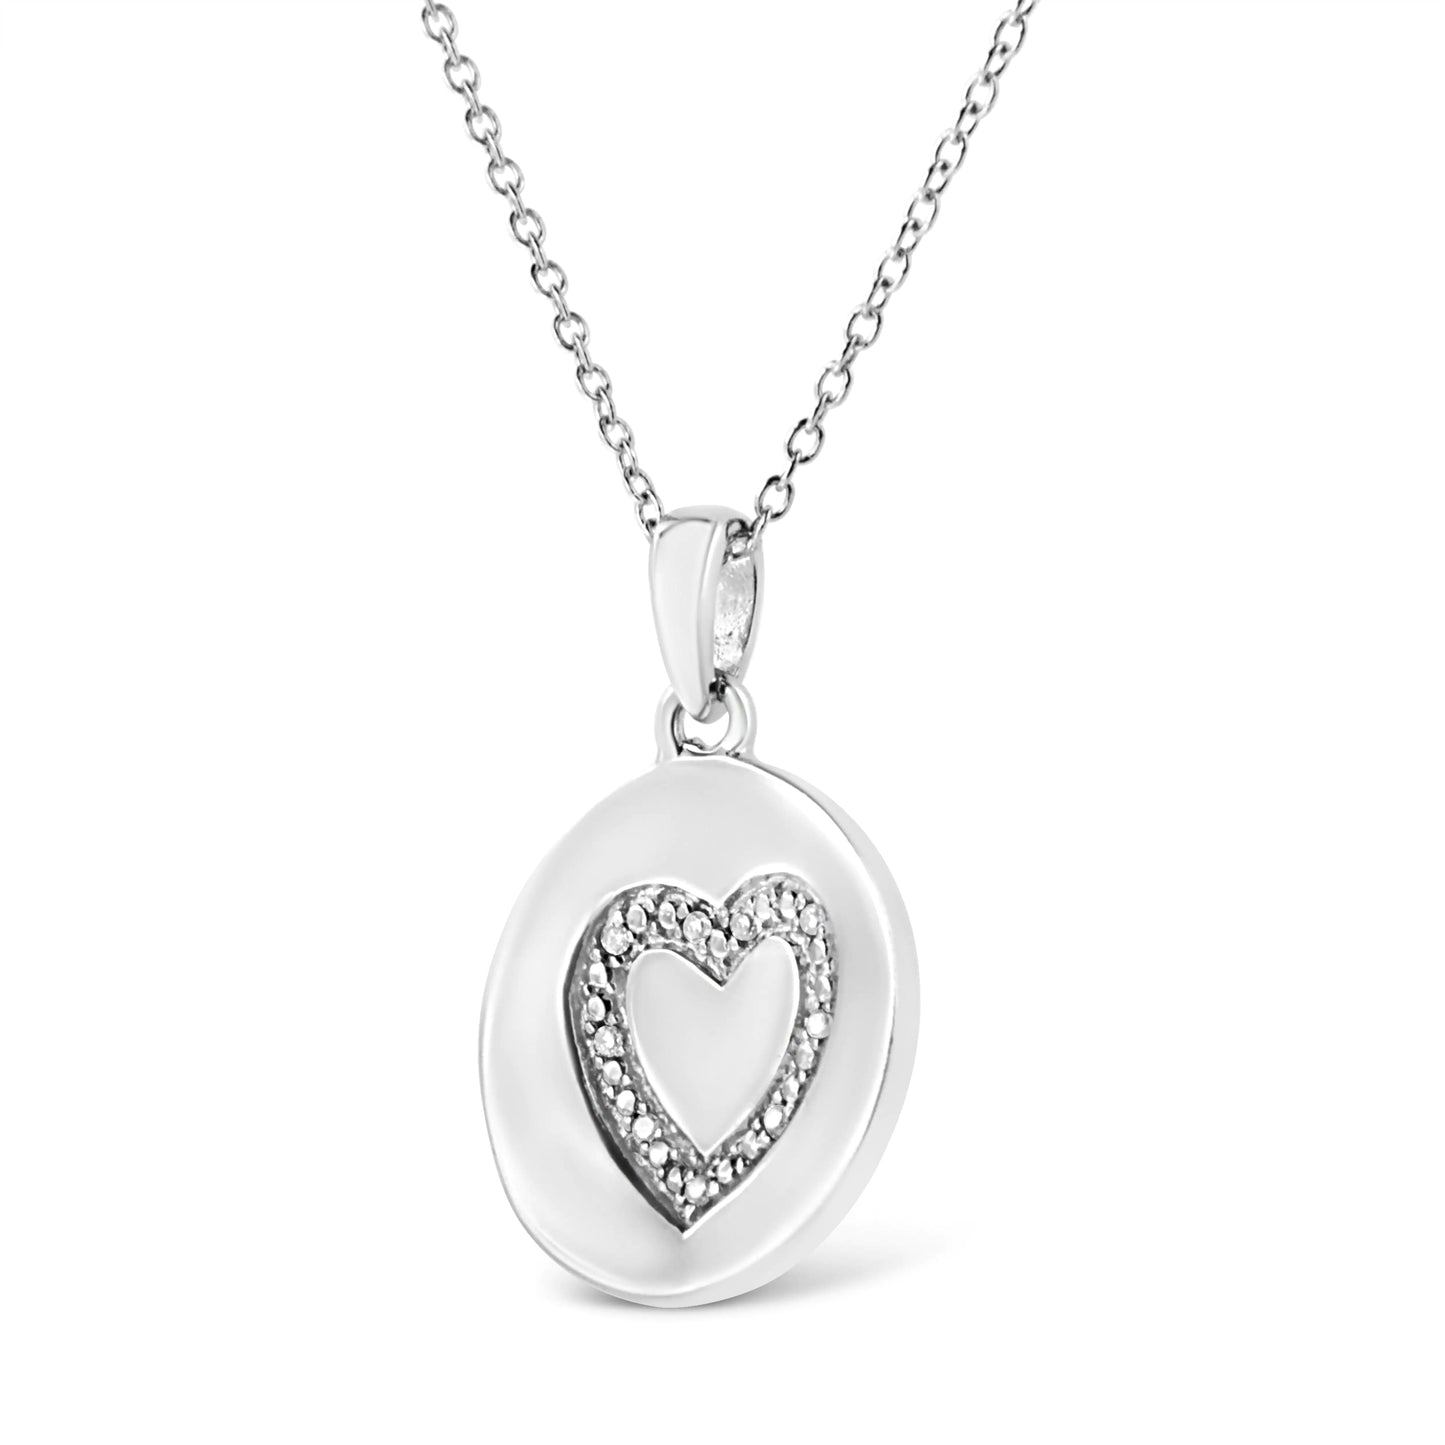 .925 Sterling Silver Prong-Set Diamond Accent Heart Emblemed 18" Pendant Necklace (I-J Color, I1-I2 Clarity)